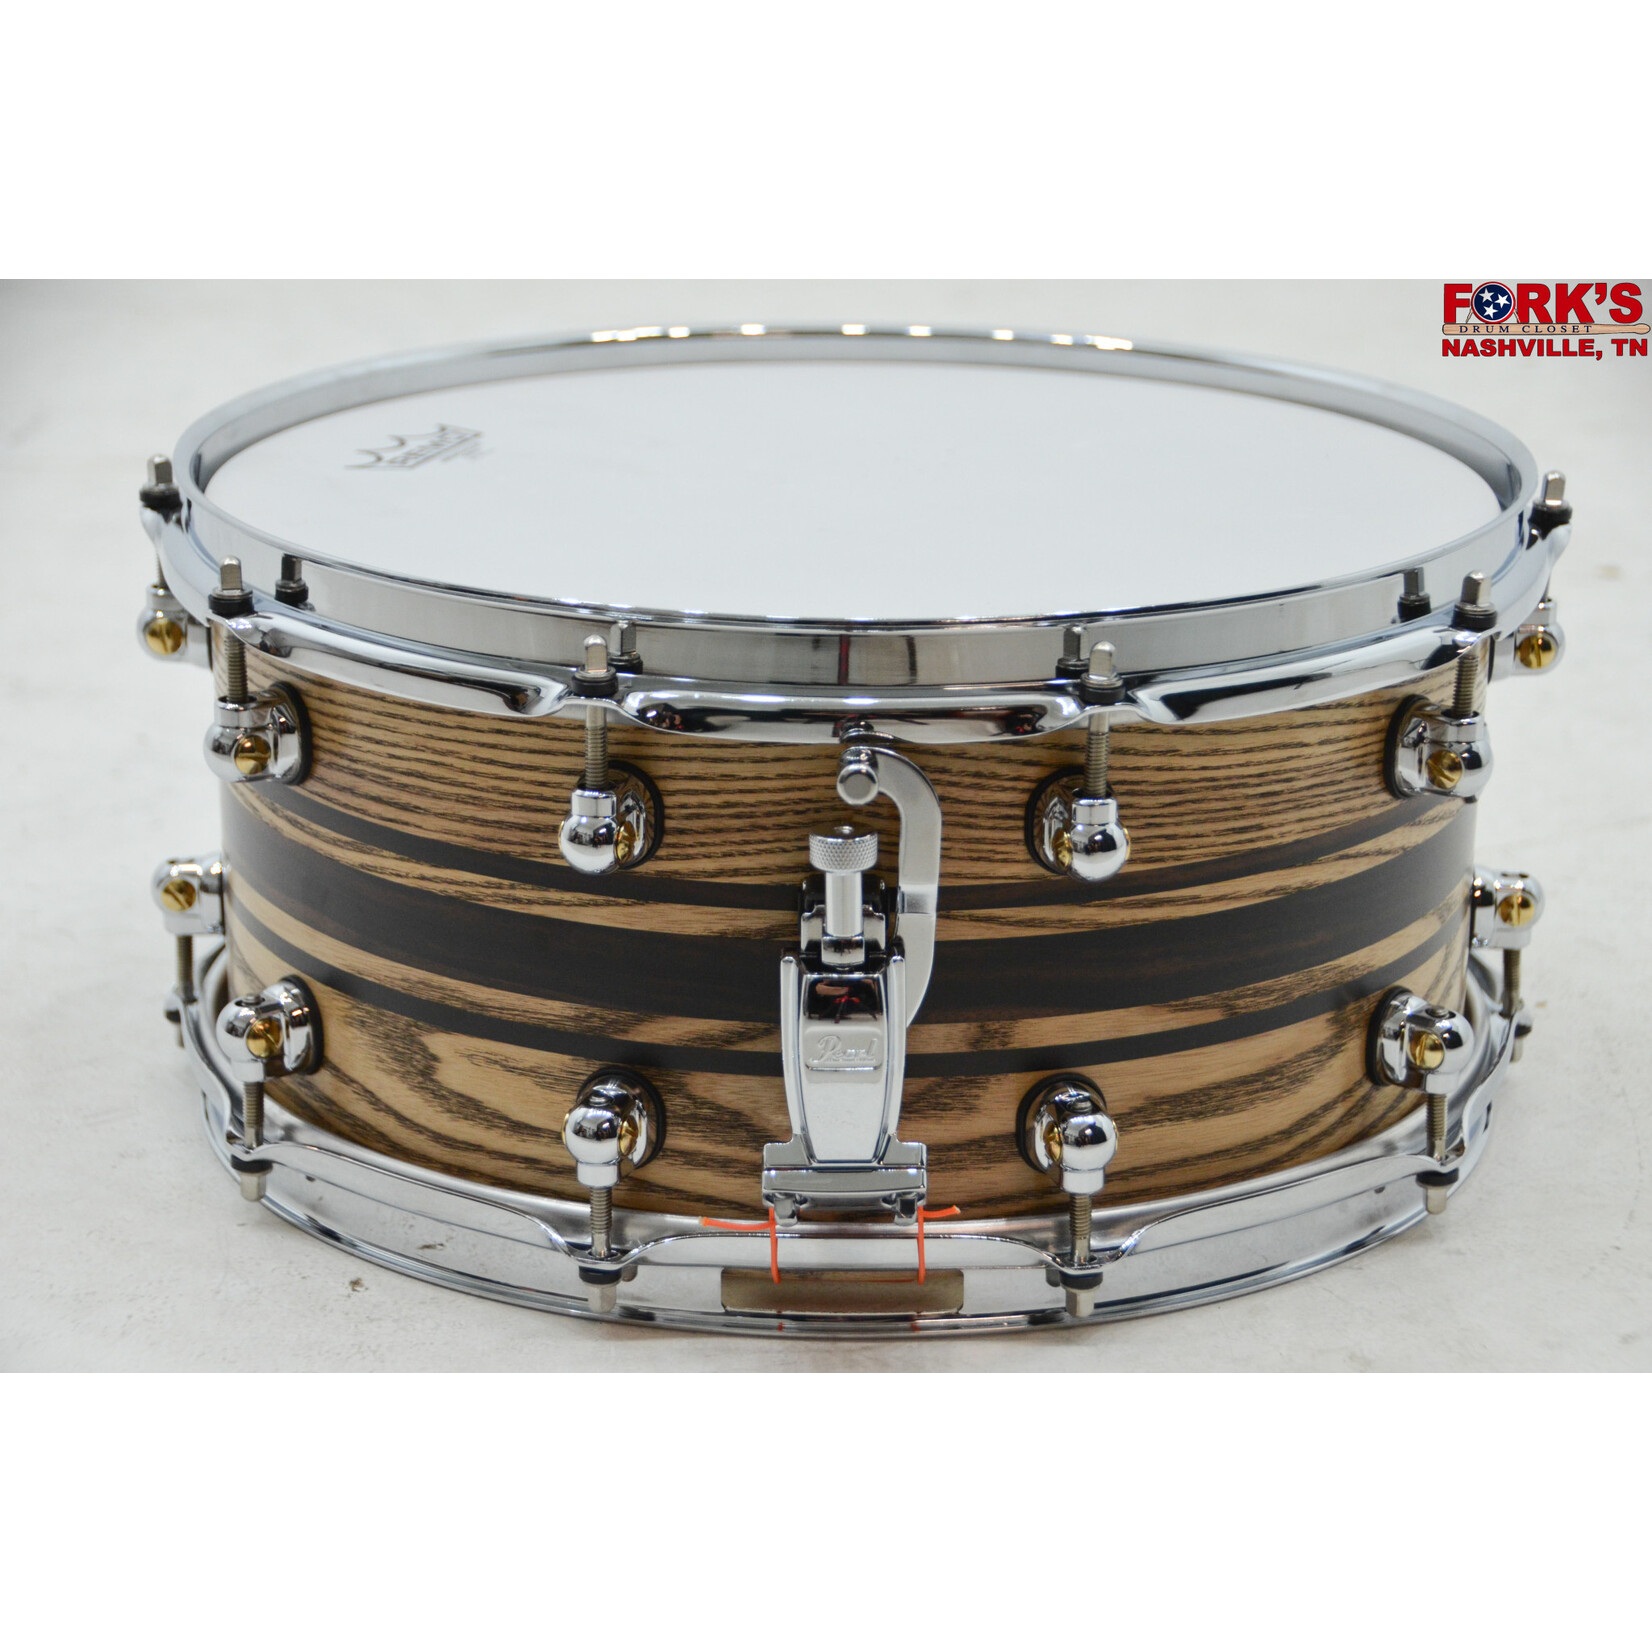 Pearl Pearl Music City Custom 6.5x14 Snare Drum - Solid Ash, Maple Rerings w/ Ebony Inlay